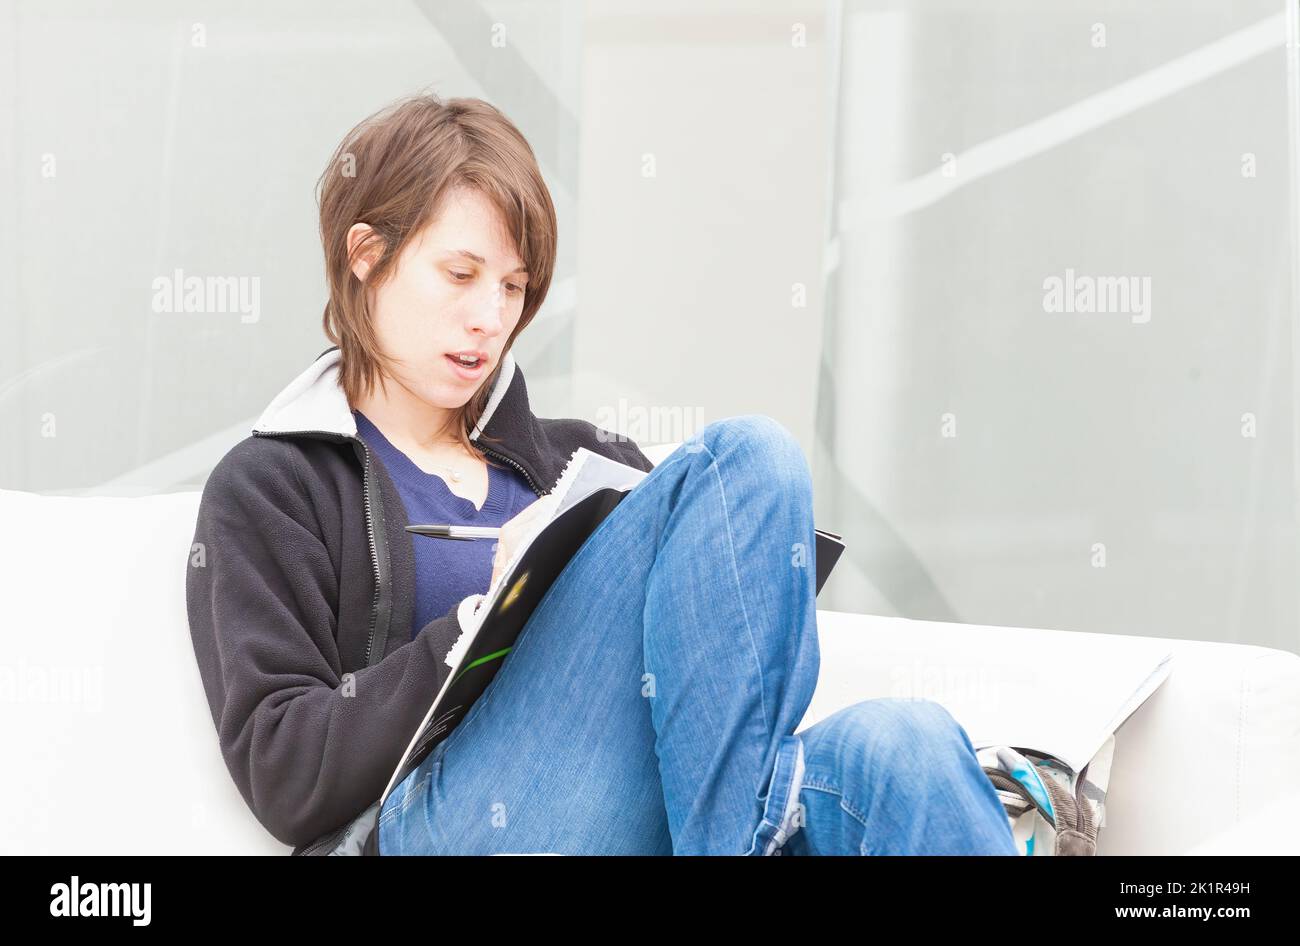 A casually dressed young woman, sitting on a white sofa and reading from and writing in, a book Stock Photo